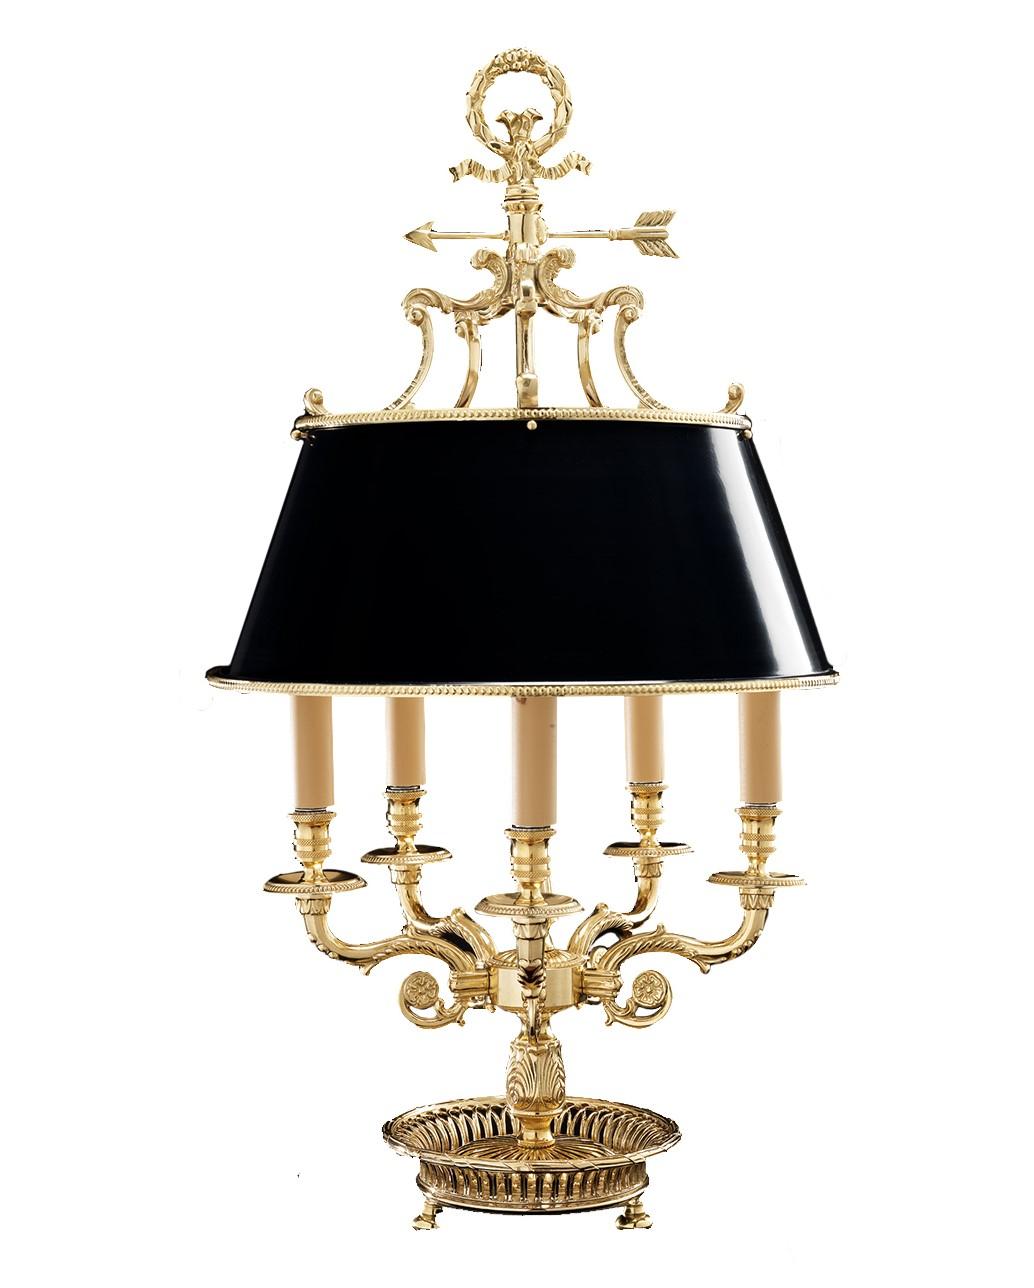 Badari lighting collections reinterpret the splendor of the past with elegance and precision. This table lamp reveals its 18th century French influence in the five-arm ornate design, crafted of bronze with French gold finish, and in the exquisite